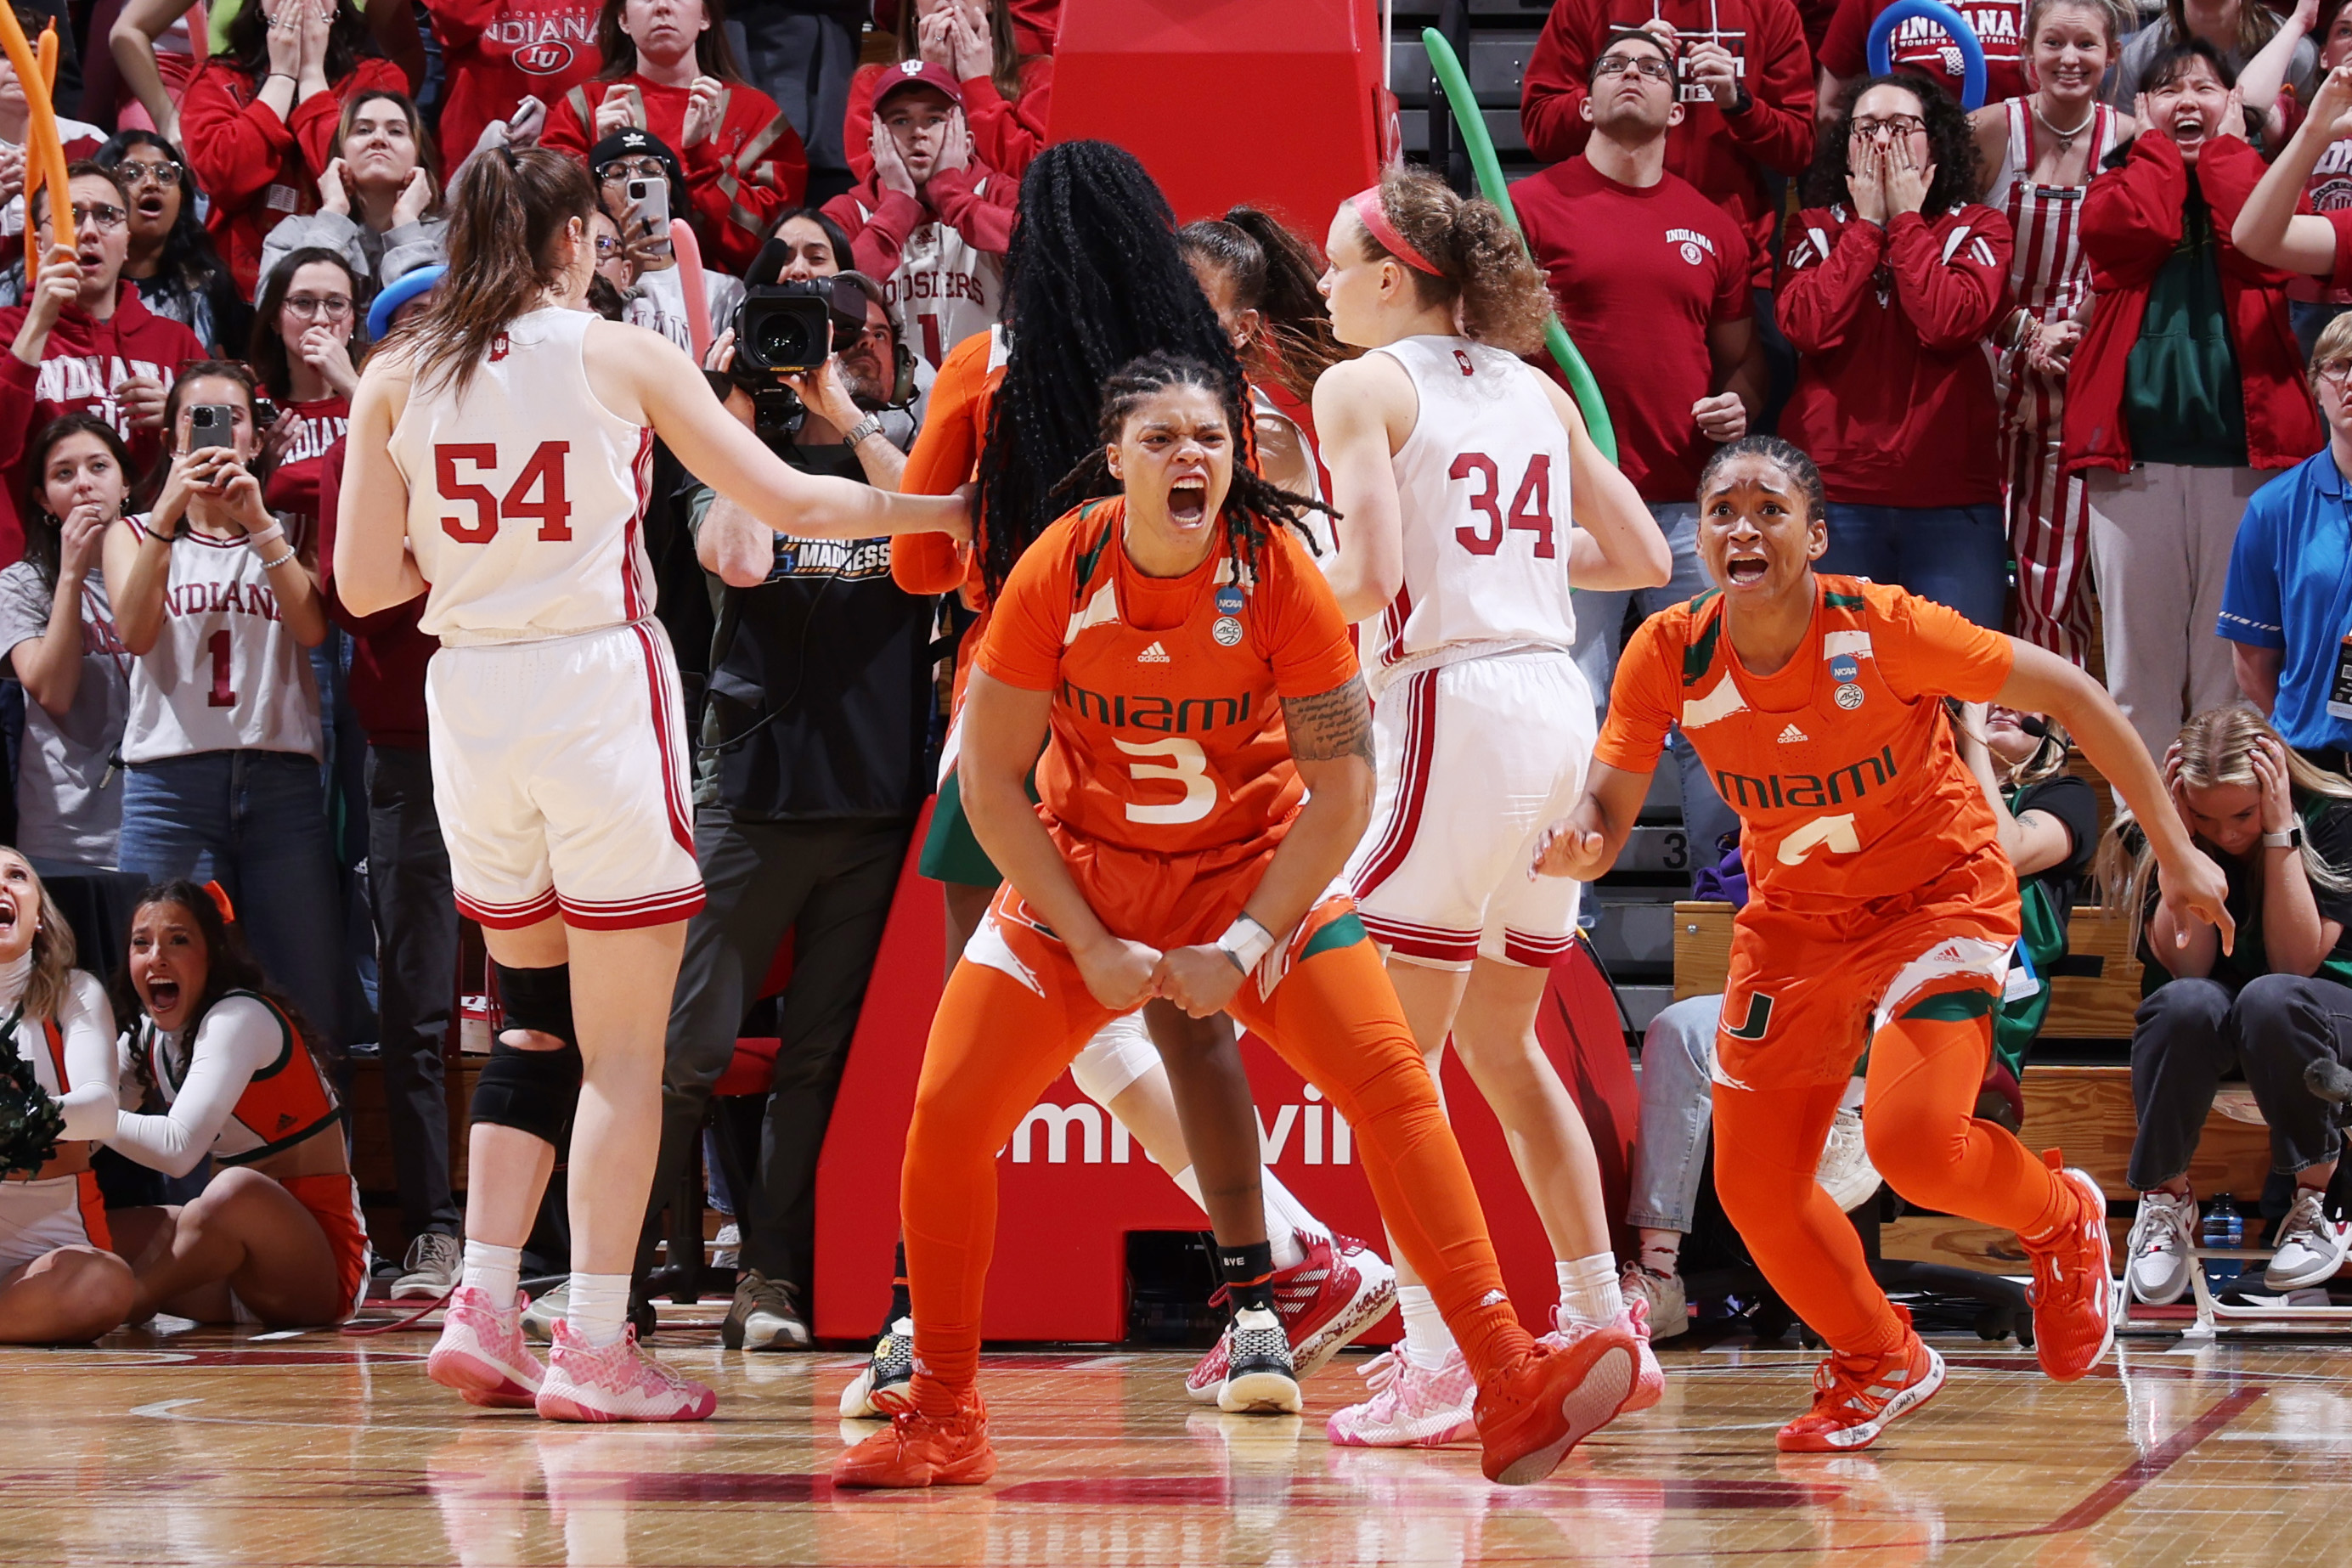 Destiny Harden #3 of the Miami Hurricanes reacts after making the game winning shot against the Indiana Hoosiers during the second round of the 2023 NCAA Women's Basketball Tournament held at Simon Skjodt Assembly Hall on March 20, 2023 in Bloomington, Indiana.